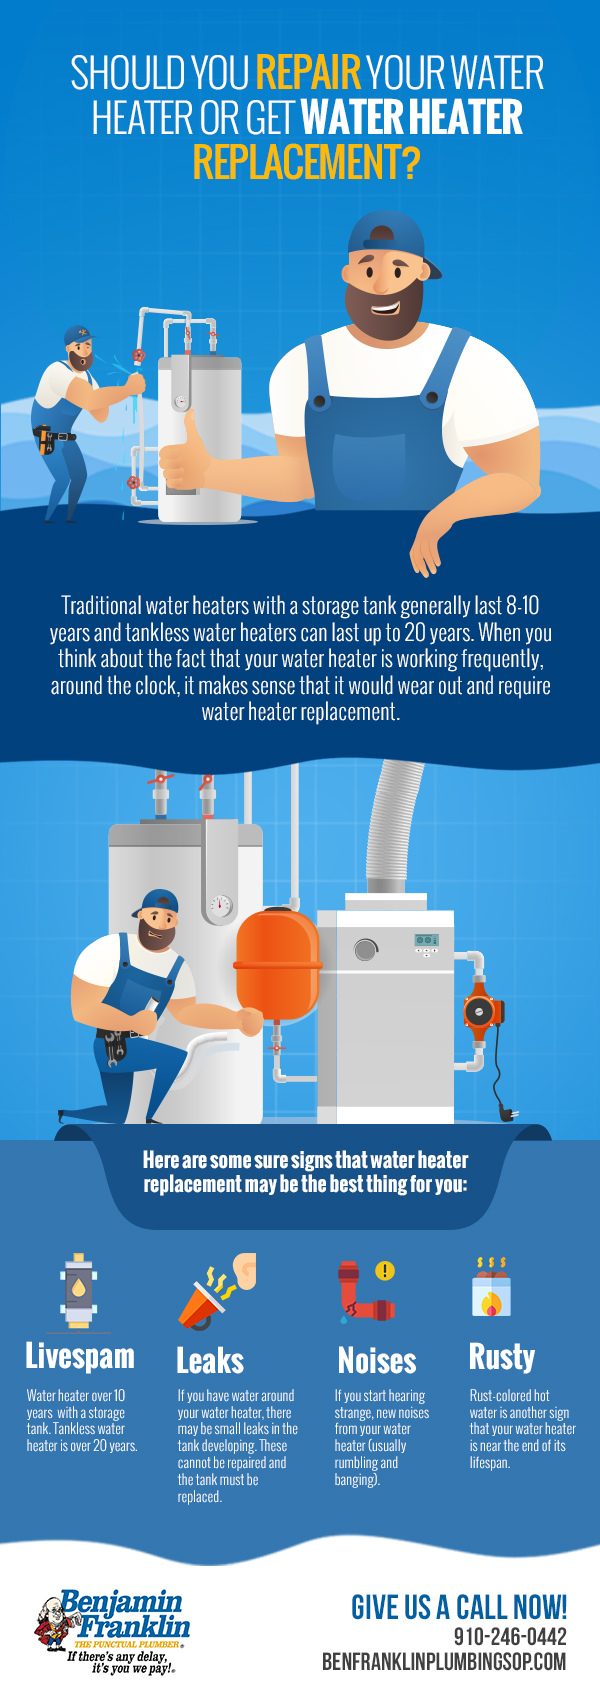 Should You Repair Your Water Heater or Get Water Heater Replacement?